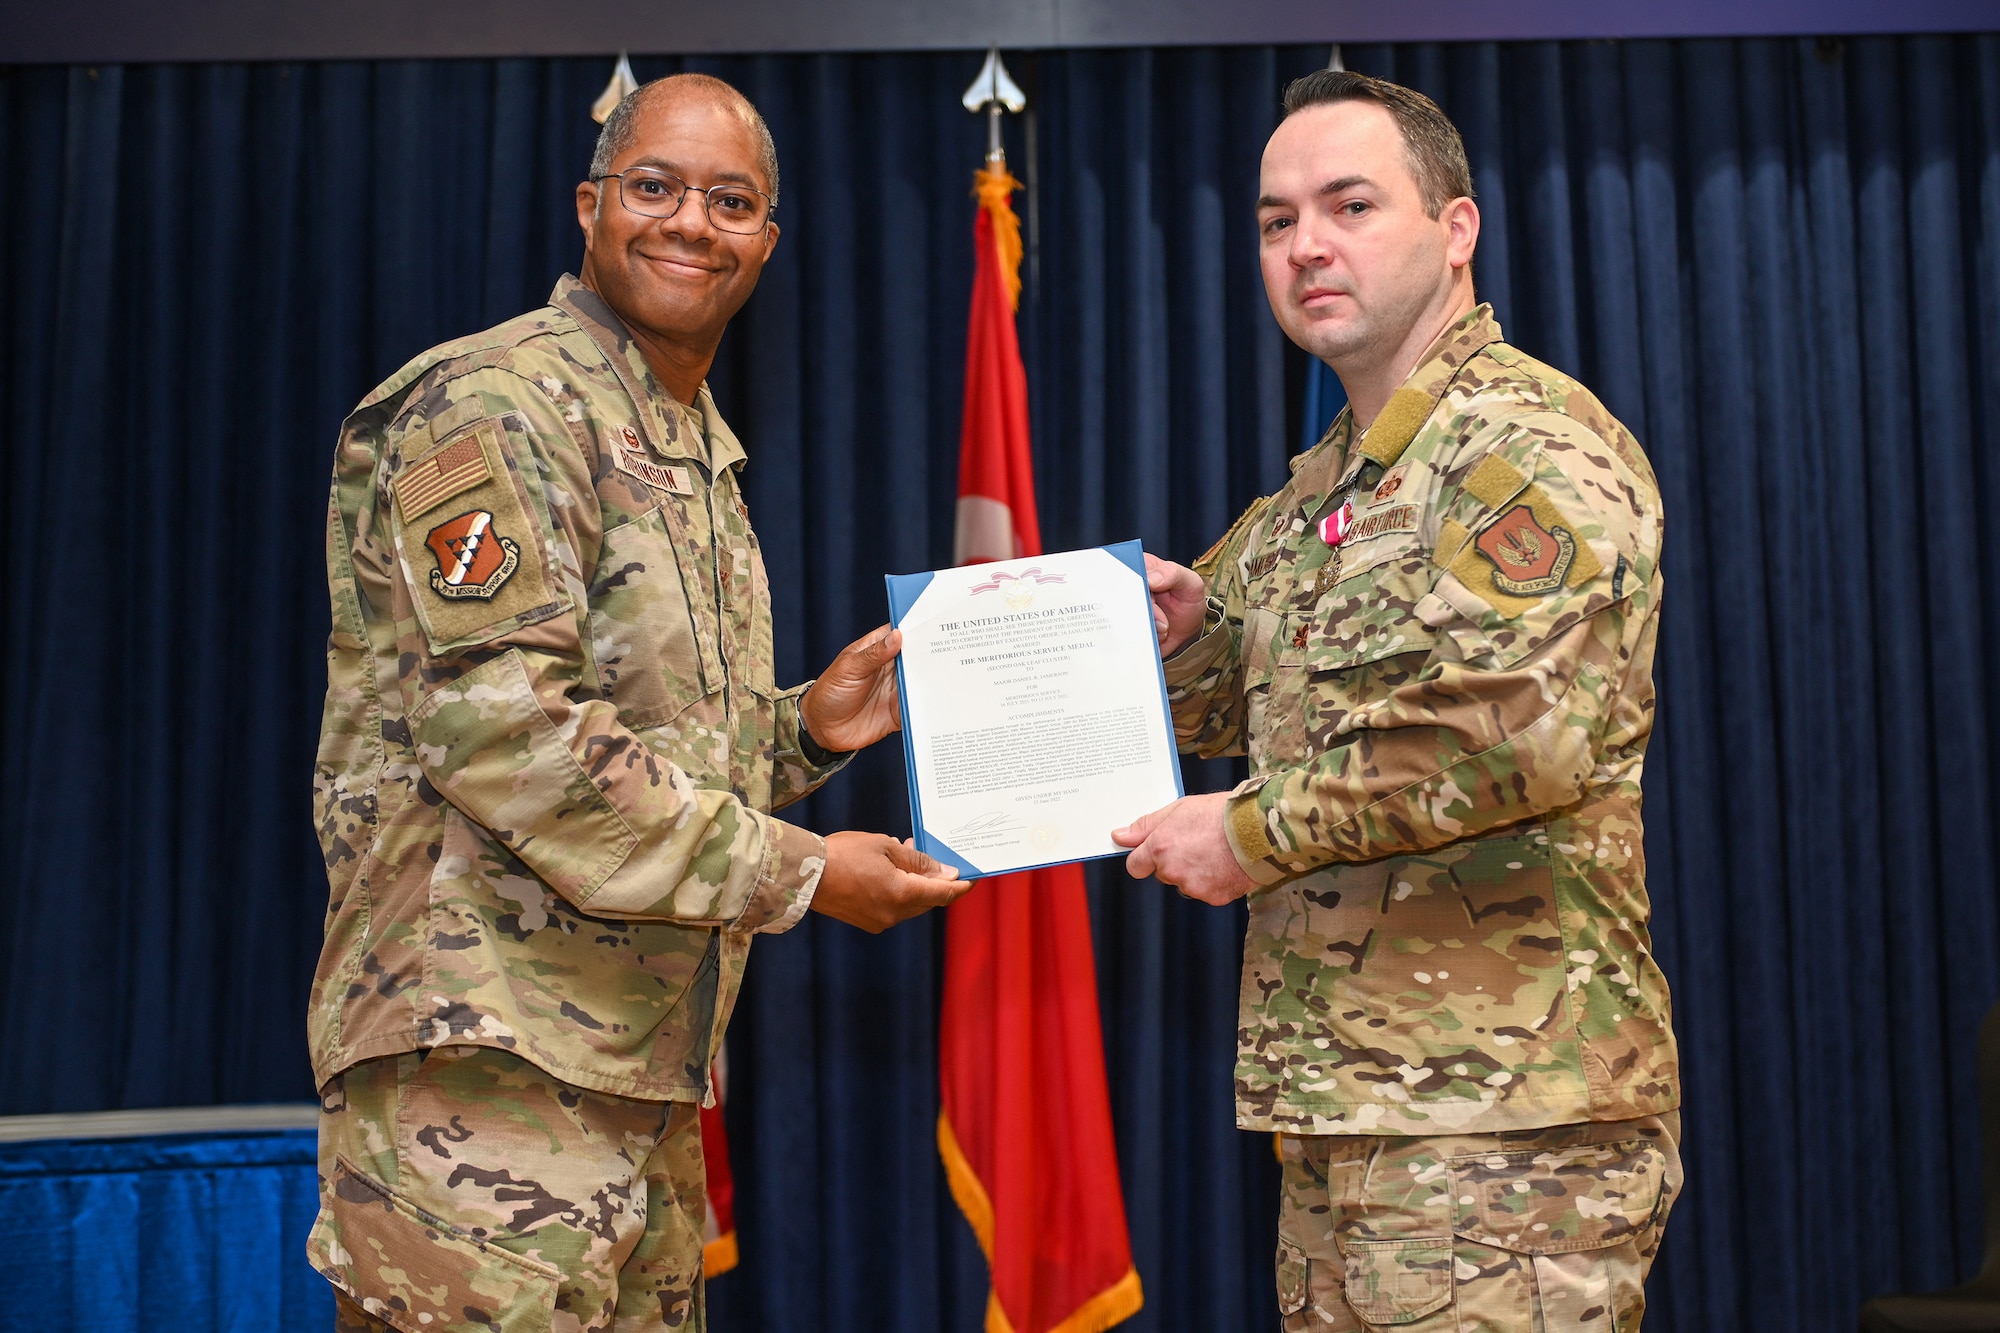 Col. Christopher Robinson (left), 39th Mission Support Group commander, and Maj. Daniel Jamerson, outgoing 39th Force Support Squadron commander, pose for a photo during a change of command ceremony at Incirlik Air Base, Turkey, July 15, 2022.